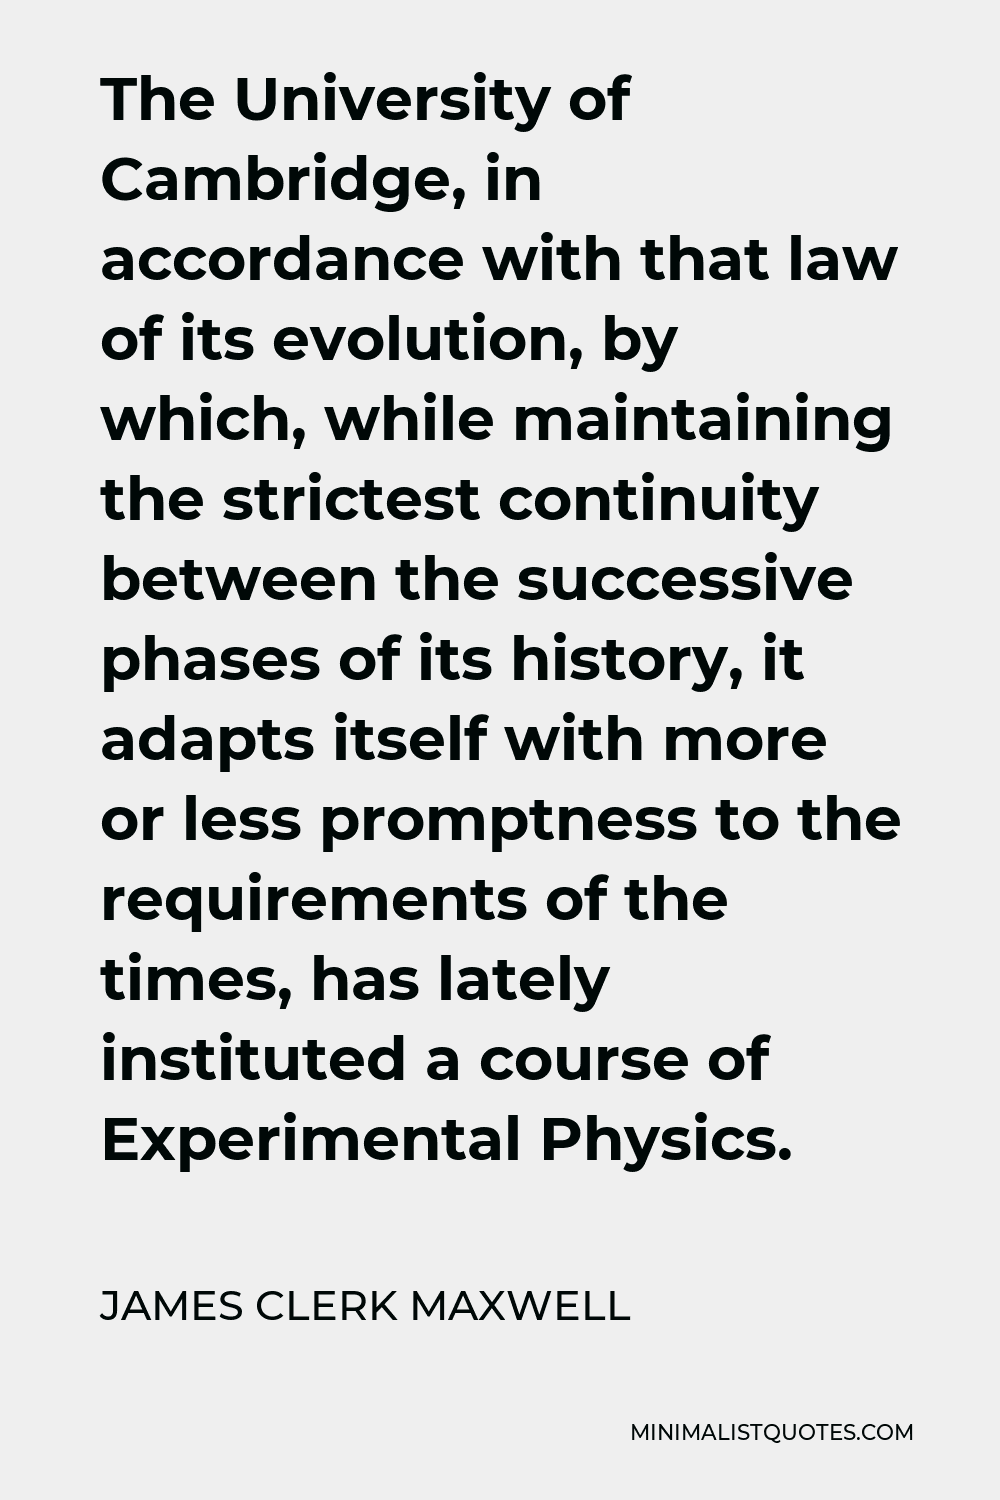 James Clerk Maxwell Quote - The University of Cambridge, in accordance with that law of its evolution, by which, while maintaining the strictest continuity between the successive phases of its history, it adapts itself with more or less promptness to the requirements of the times, has lately instituted a course of Experimental Physics.